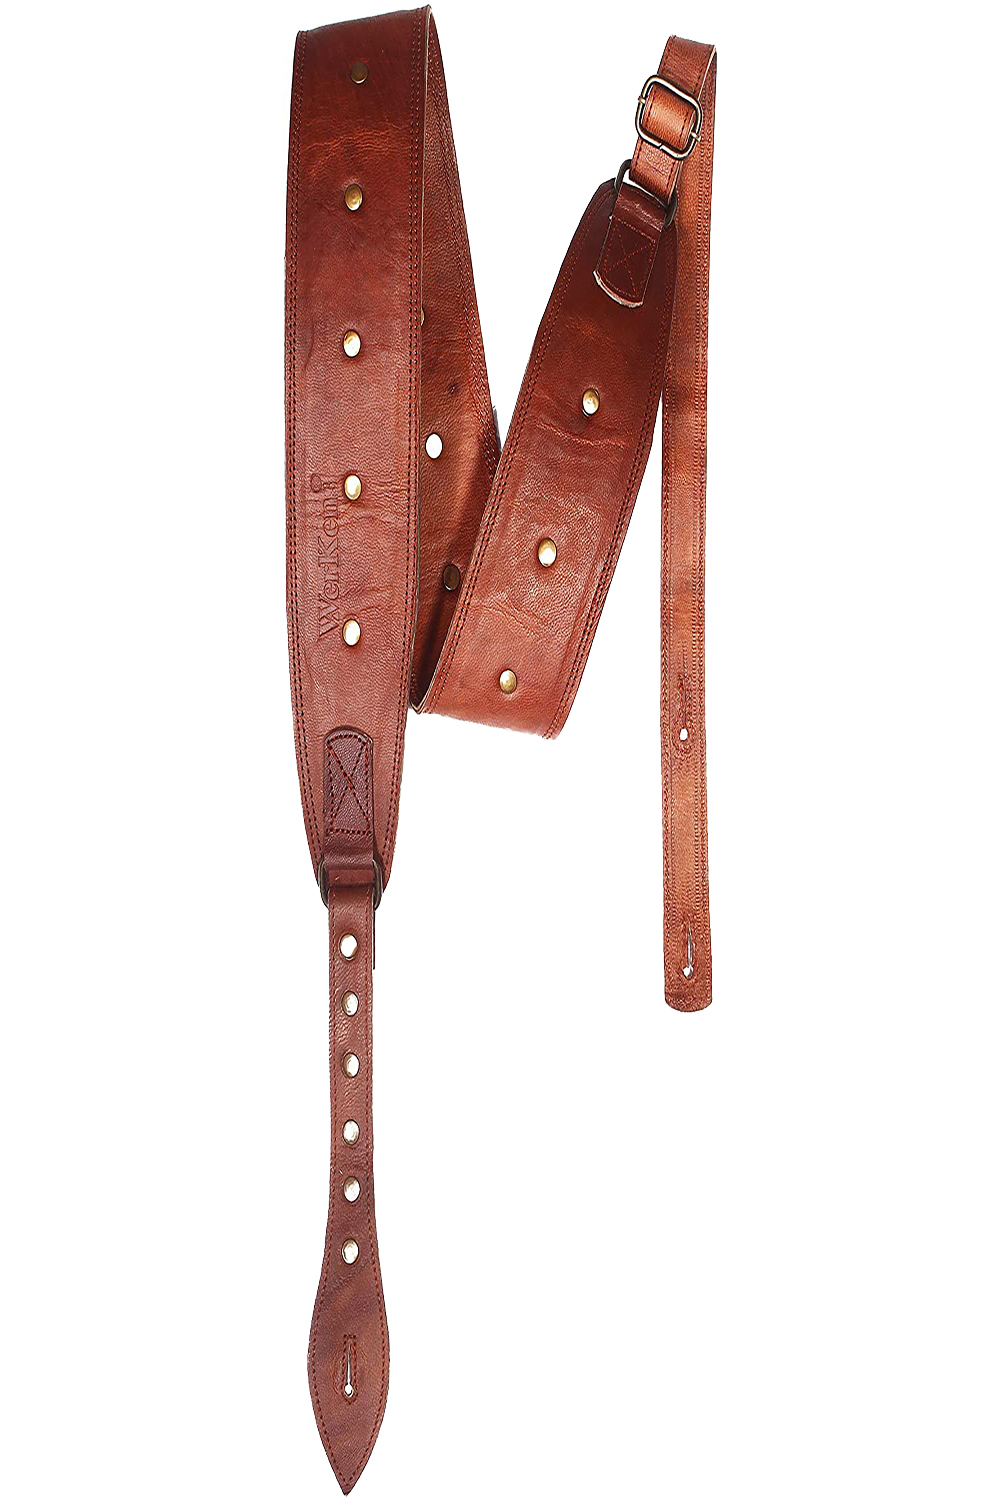 WerKens Genuine Leather Guitar Strap 3 Inch with Wide Adjustable Guitar  Straps - Brown with Antique Brass Studs Vintage Rock Padded Guitar and Bass  Strap - WerKens